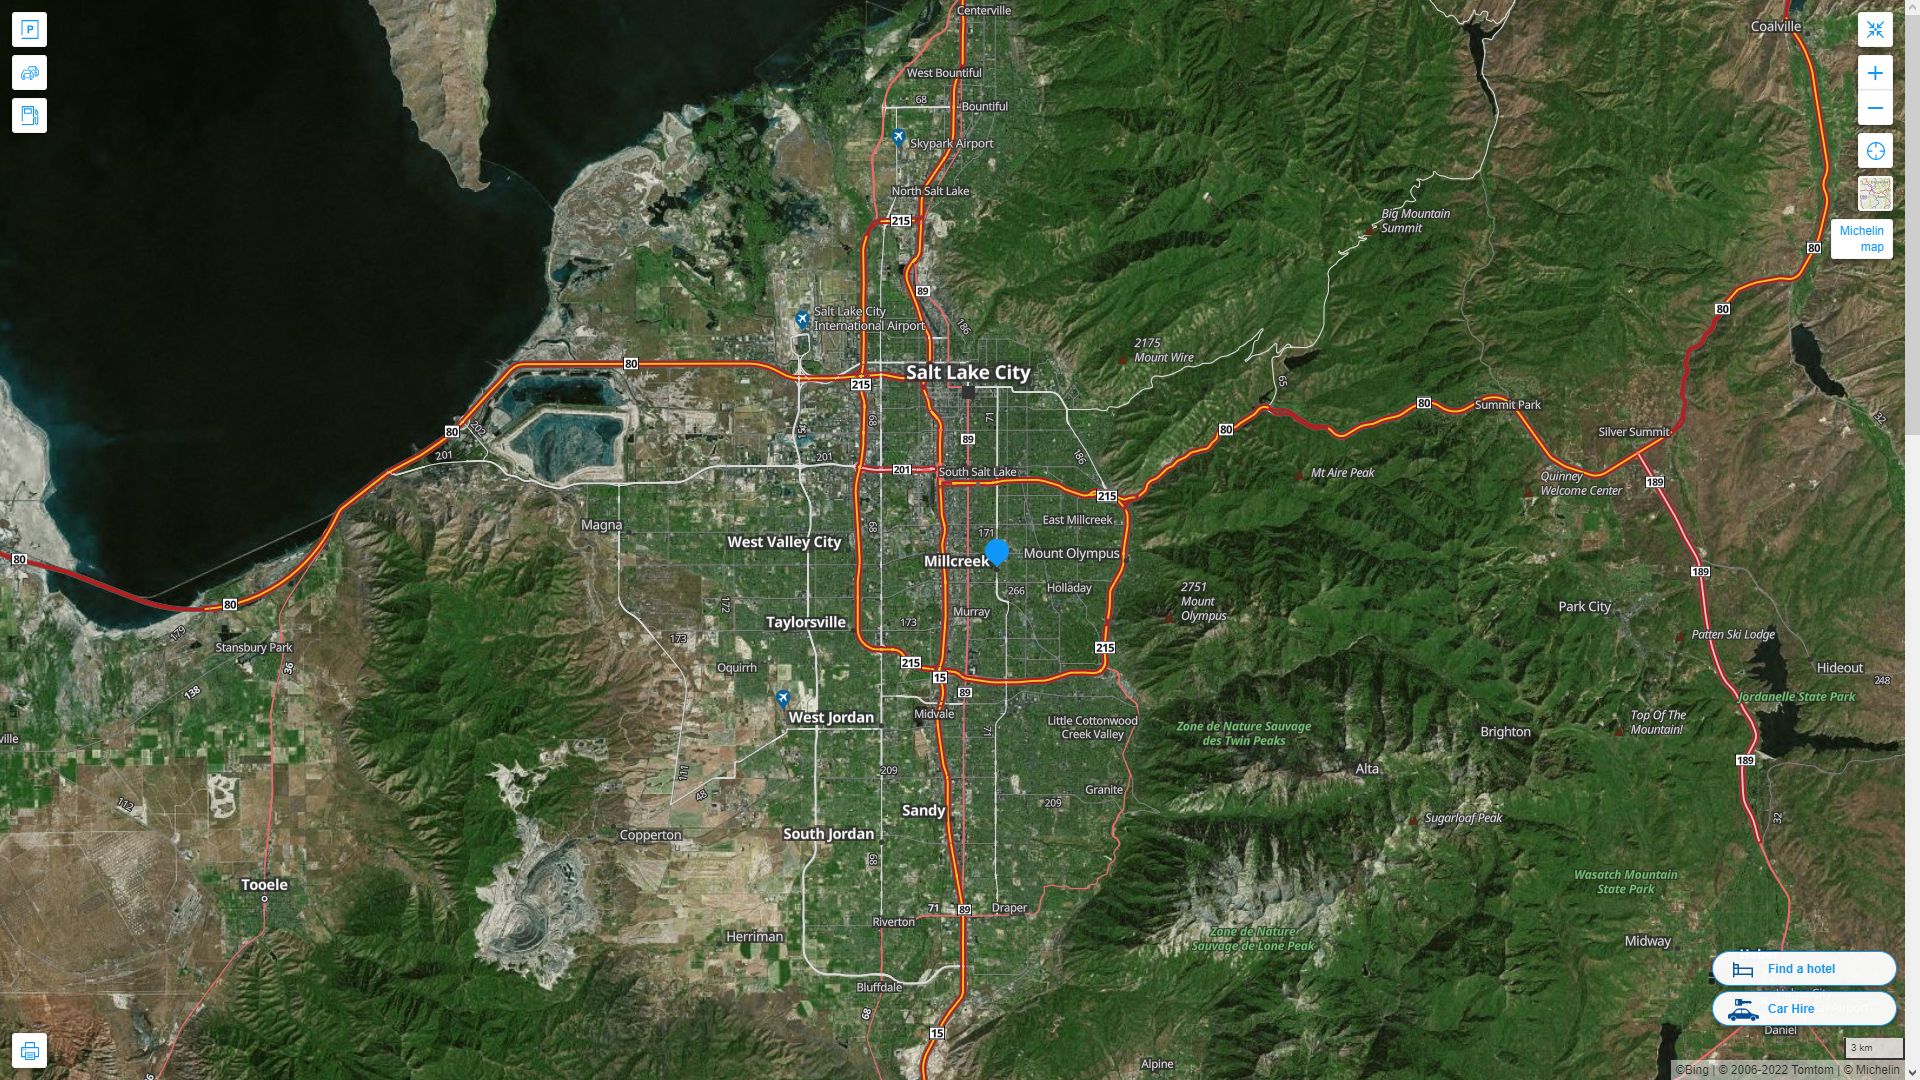 Millcreek Utah Highway and Road Map with Satellite View